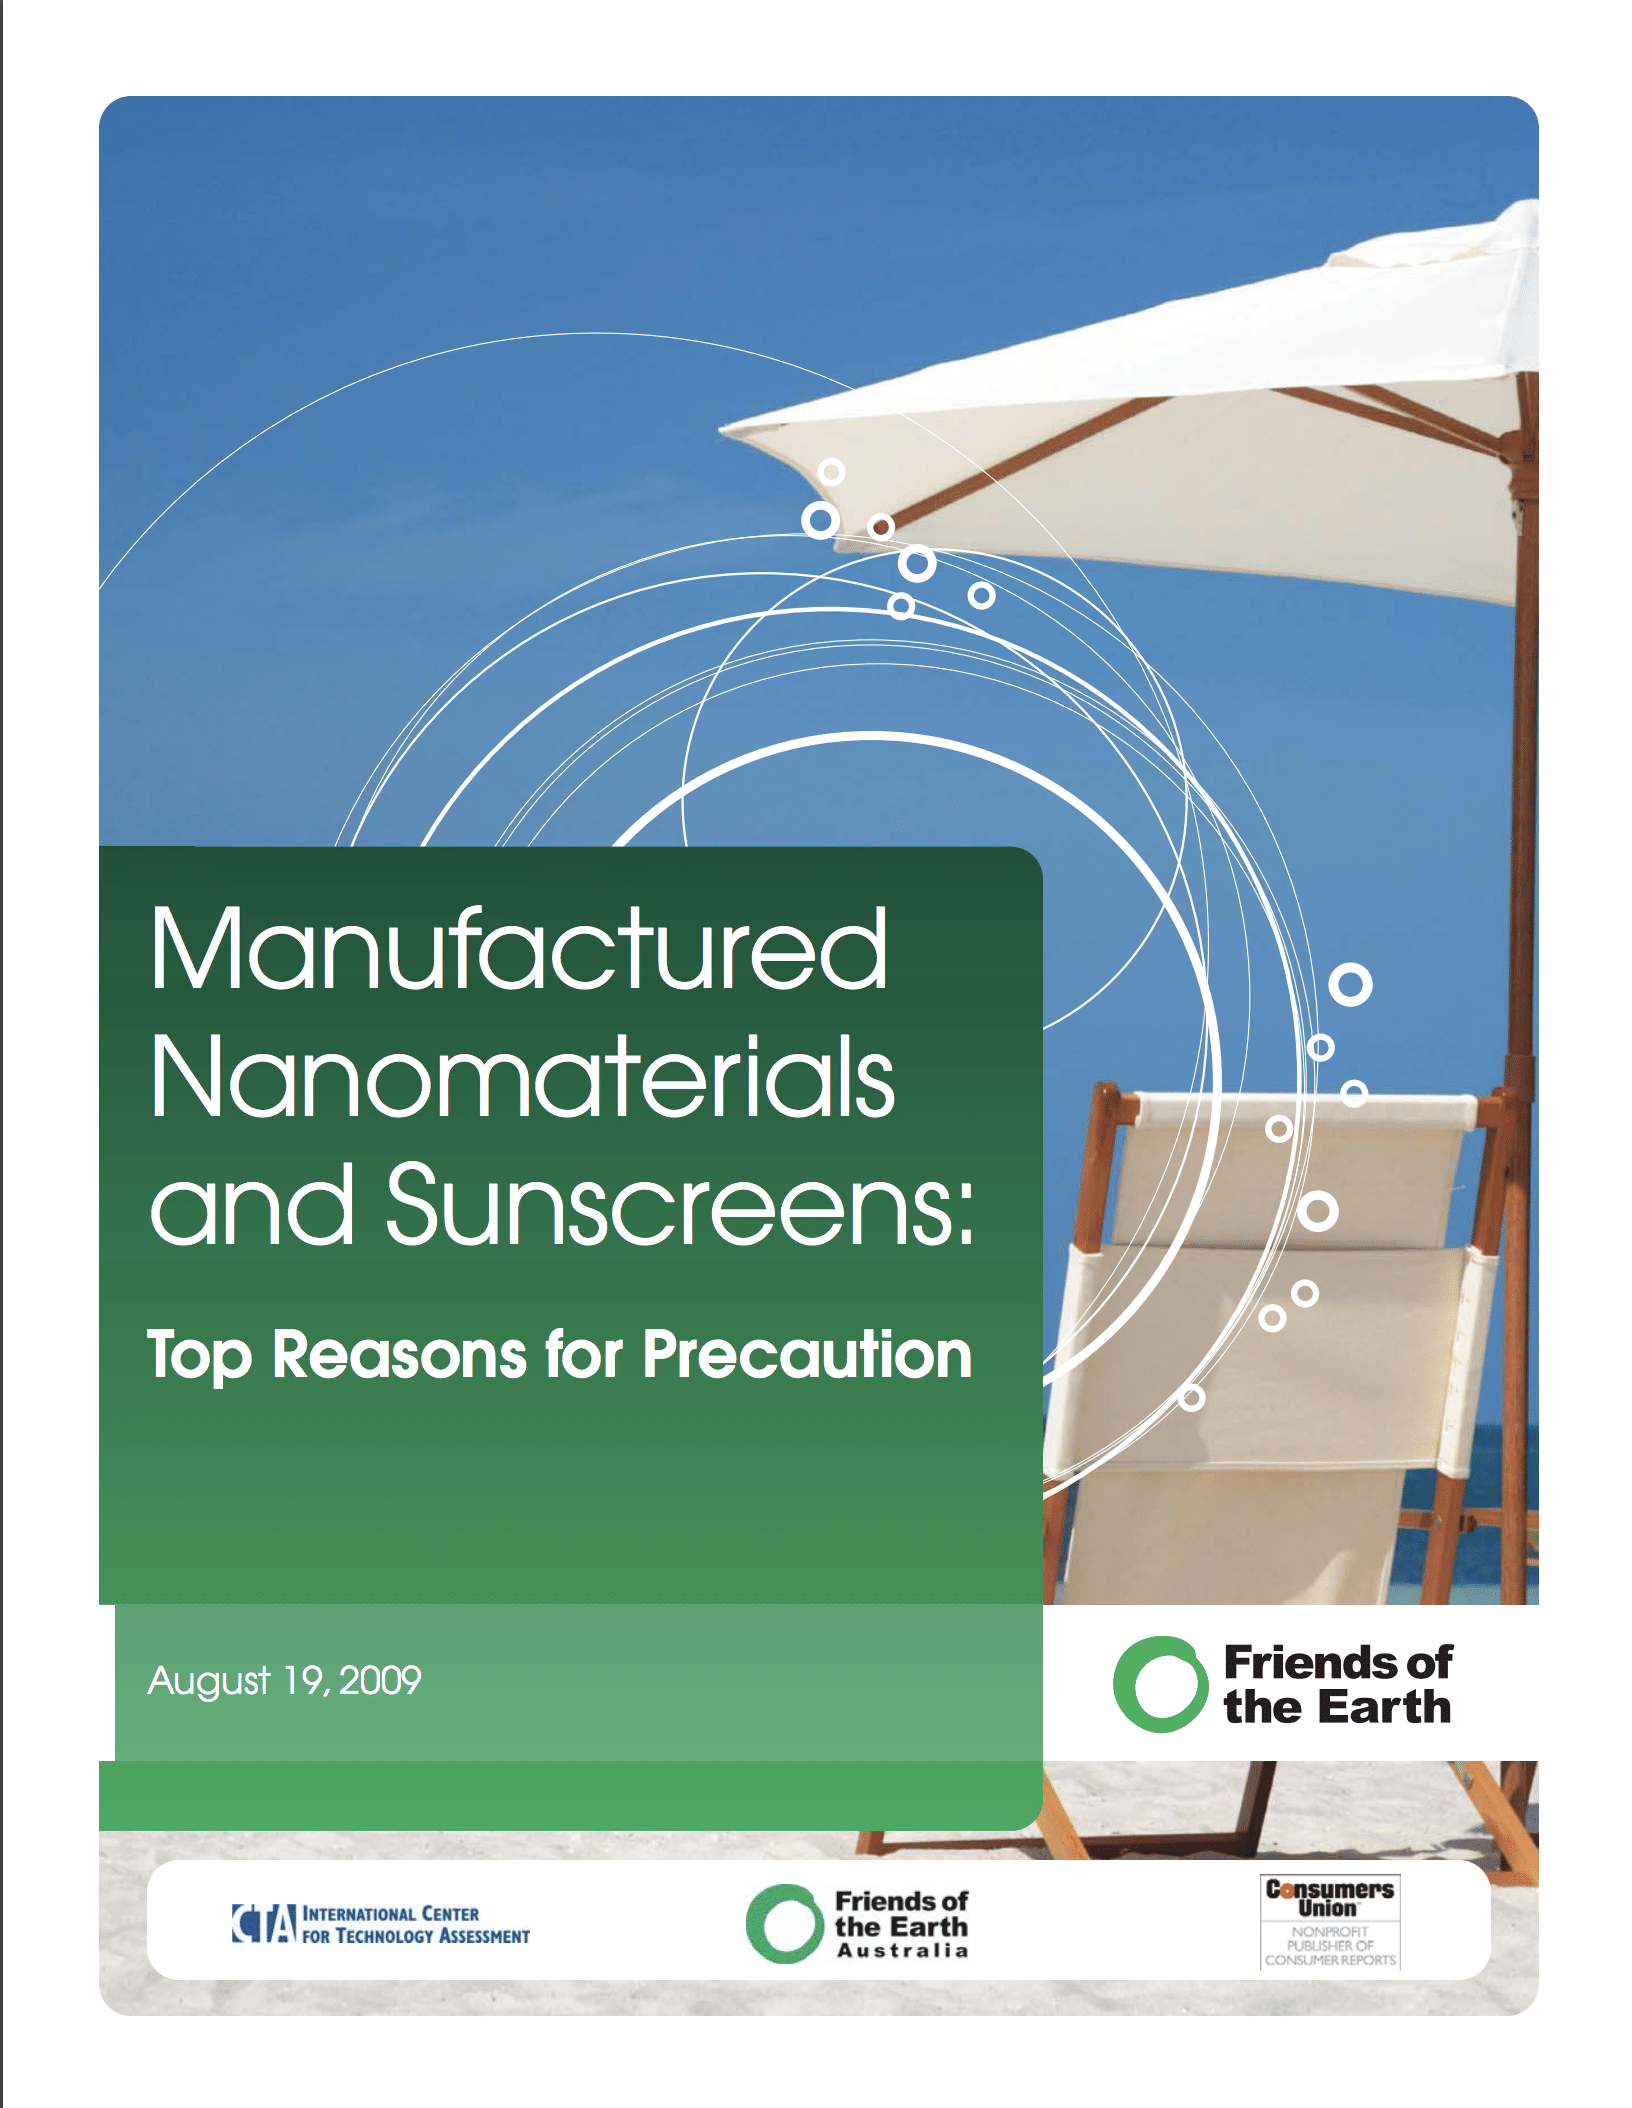 Manufactured nanomaterials and sunscreens: Top reasons for precaution